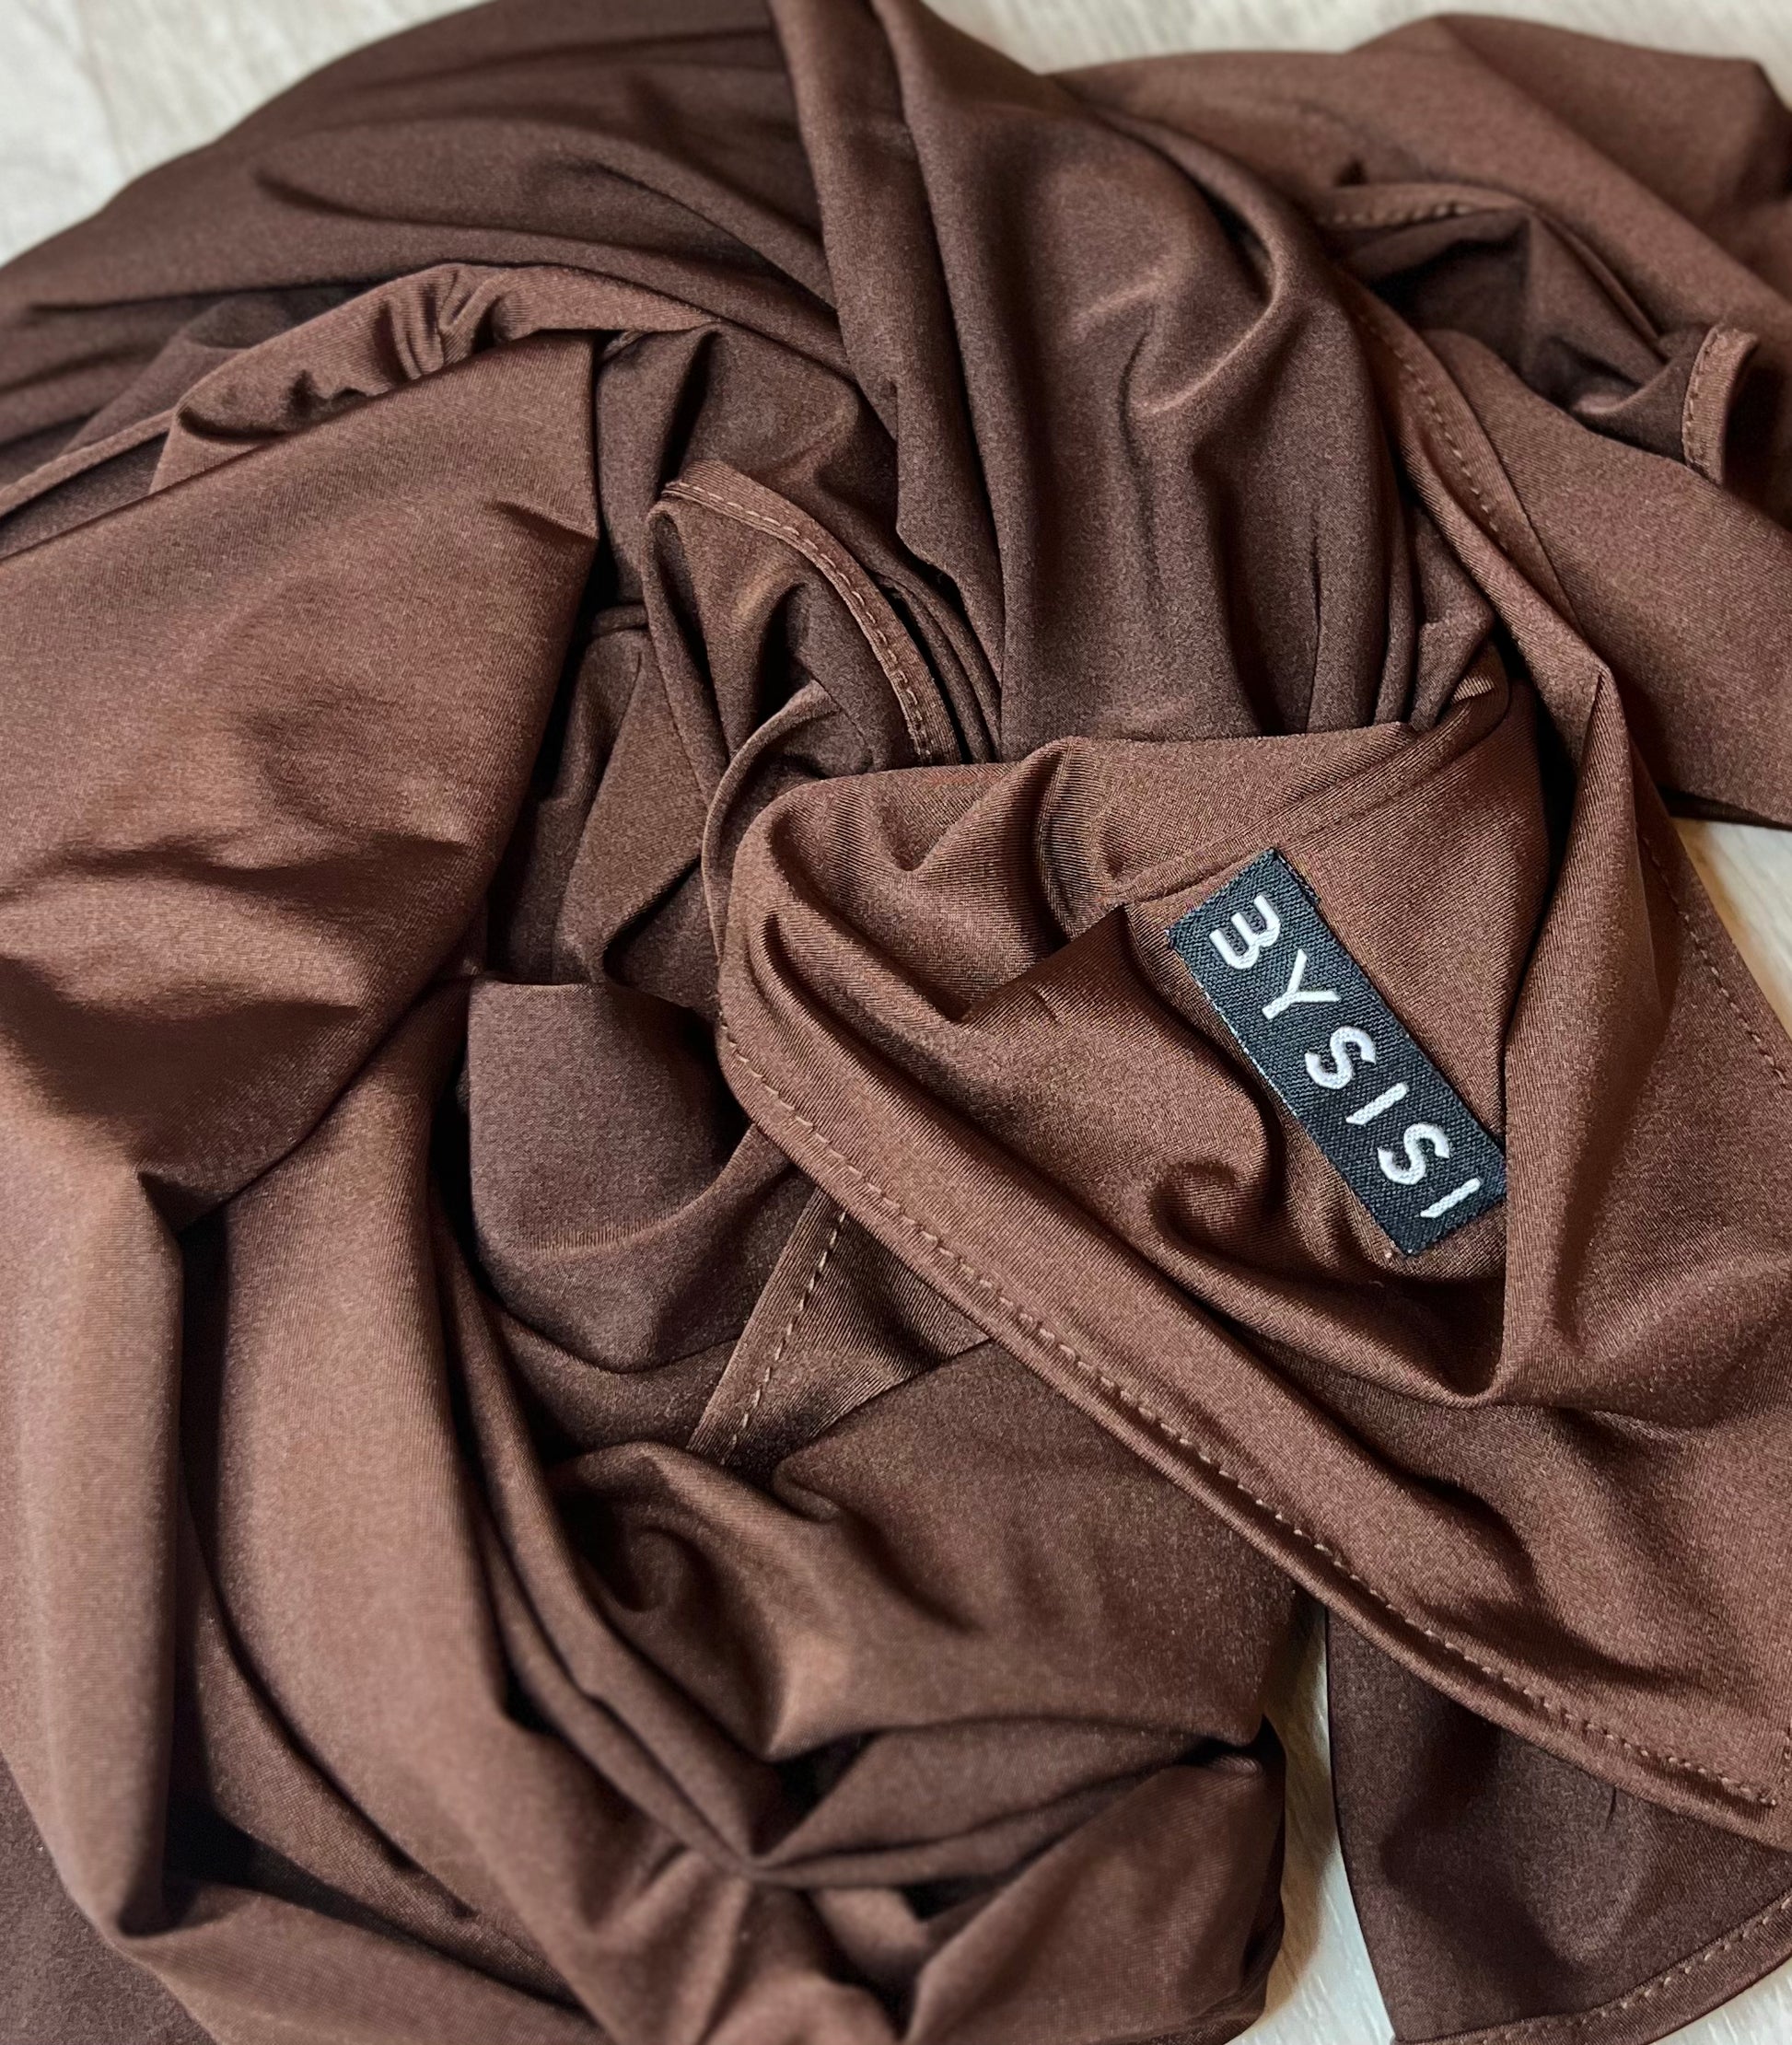 Satin Jersey in Chocolate - BYSISI